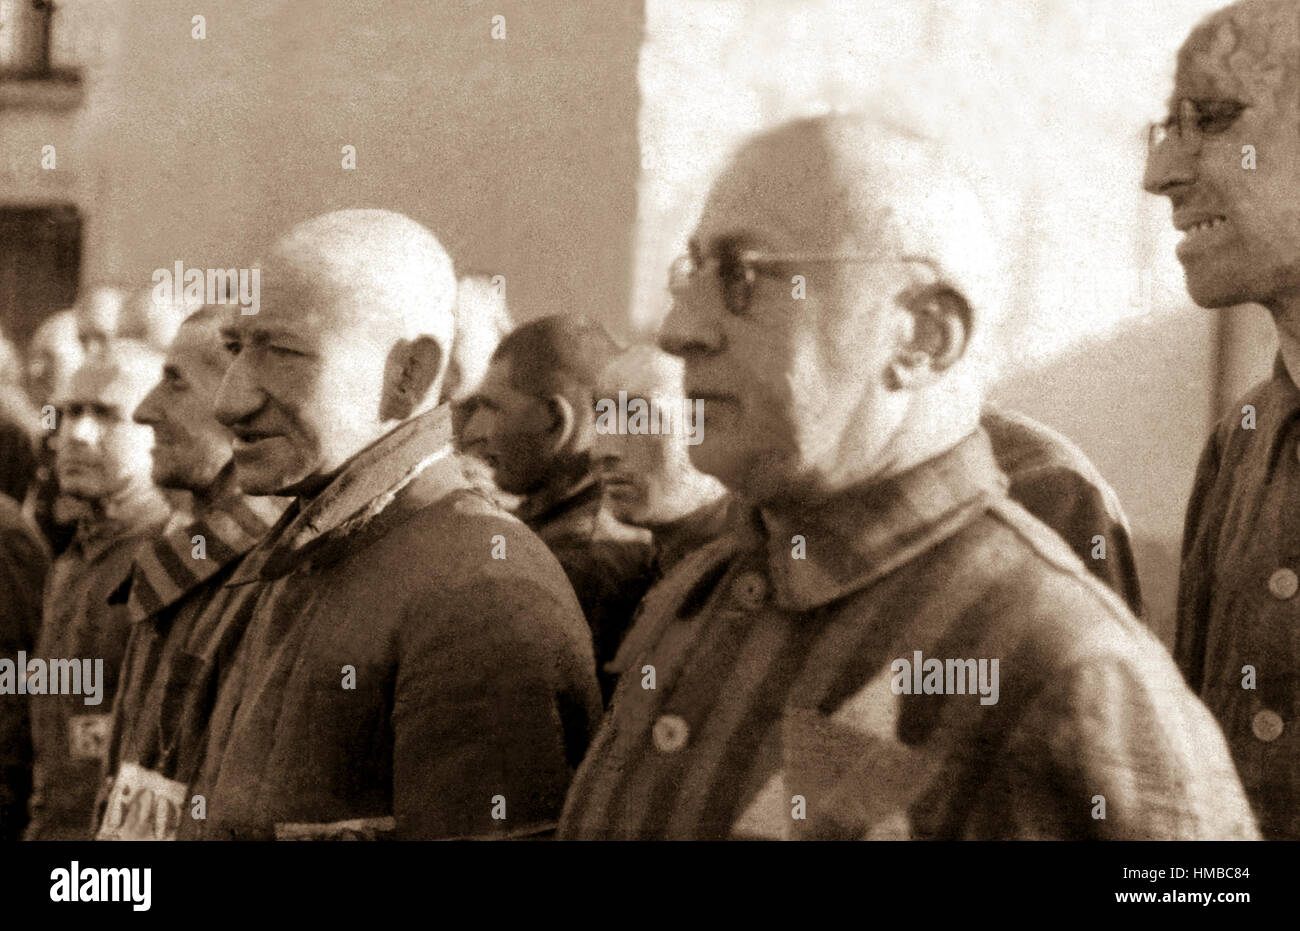 Prisoners in the concentration camp at Sachsenhausen, Germany, December 19, 1938. Heinrich Hoffman Collection.  (Foreign Record Seized) Stock Photo